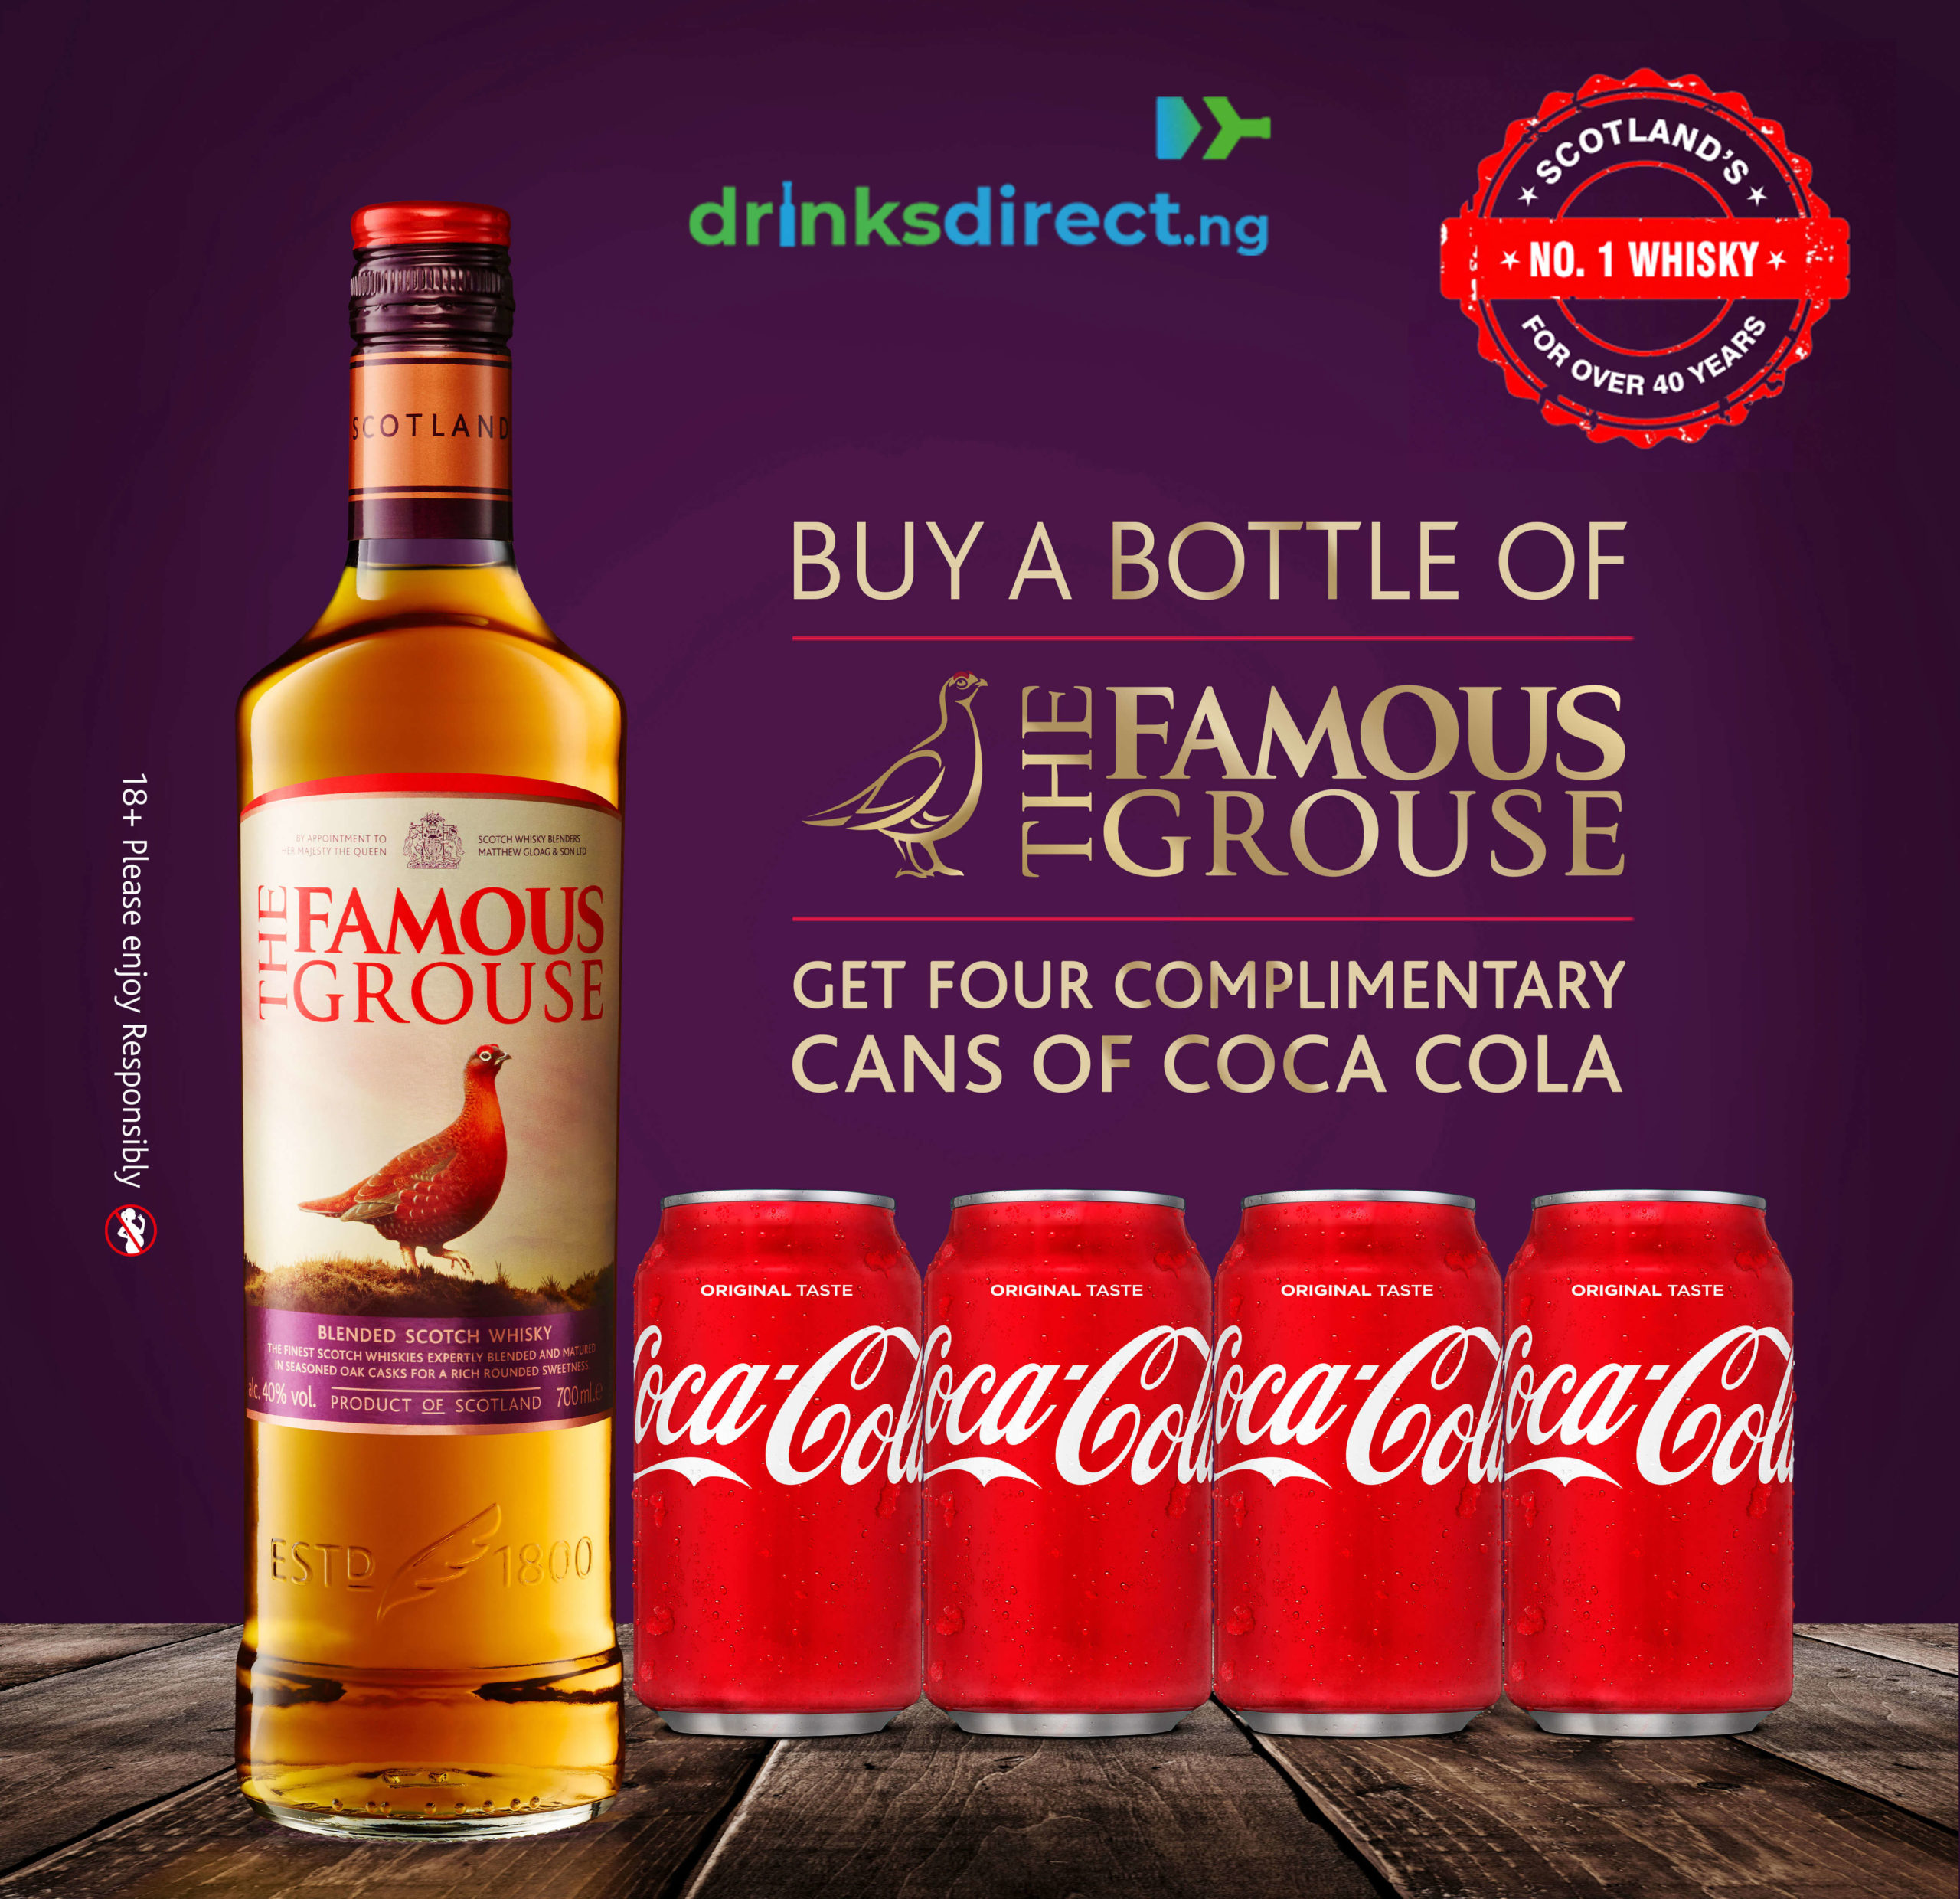 the-famous-grouse-drinks-direct